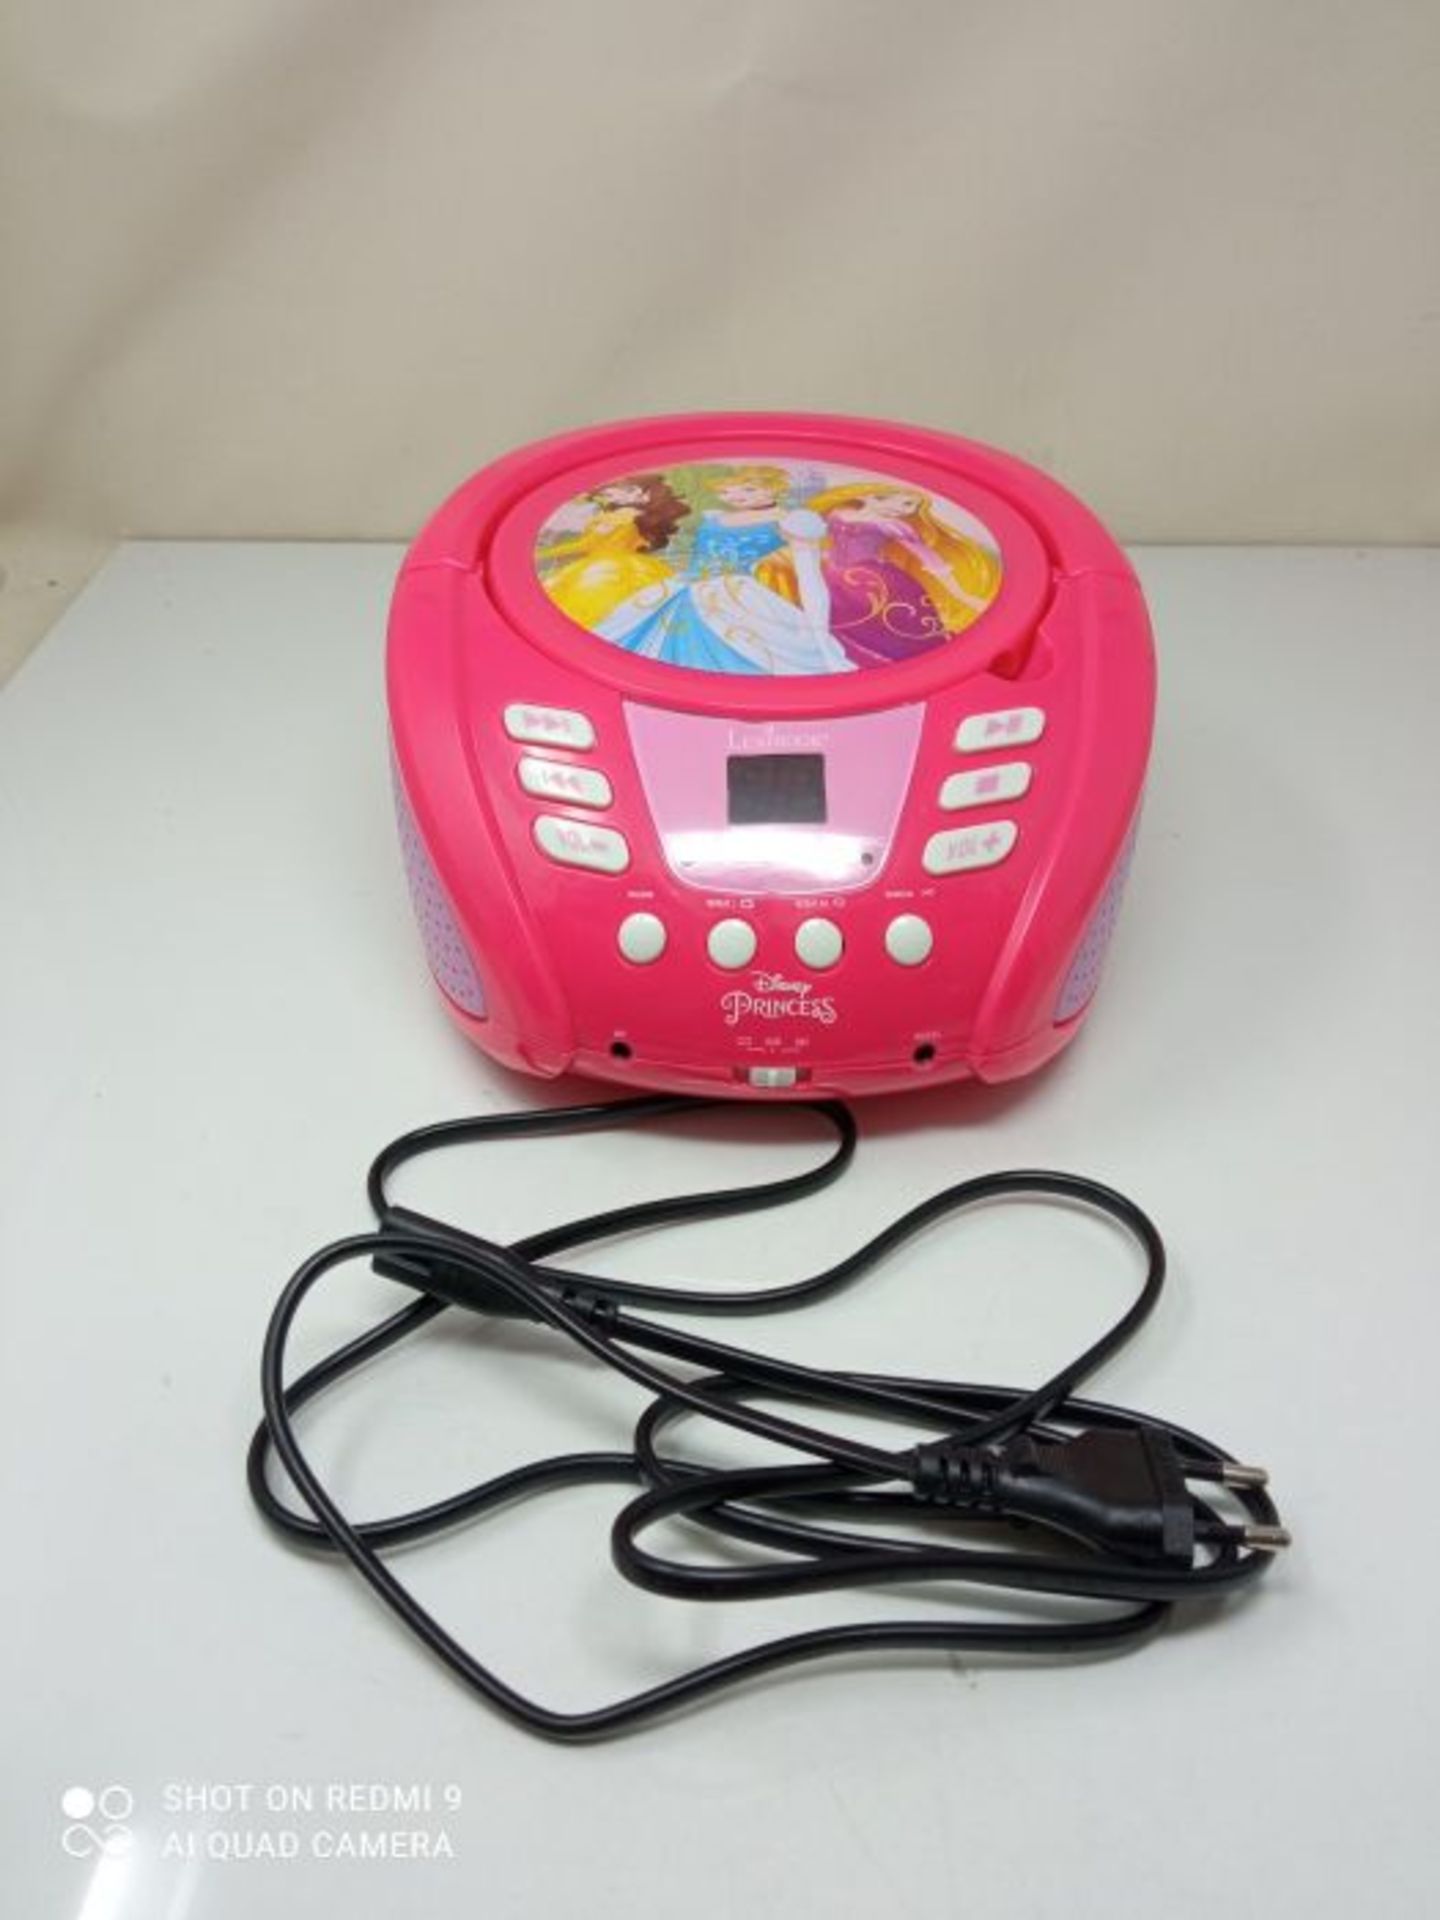 Lexibook Disney Princess CD player, aux-in jack, AC or battery-operated, Pink/White, R - Image 3 of 3